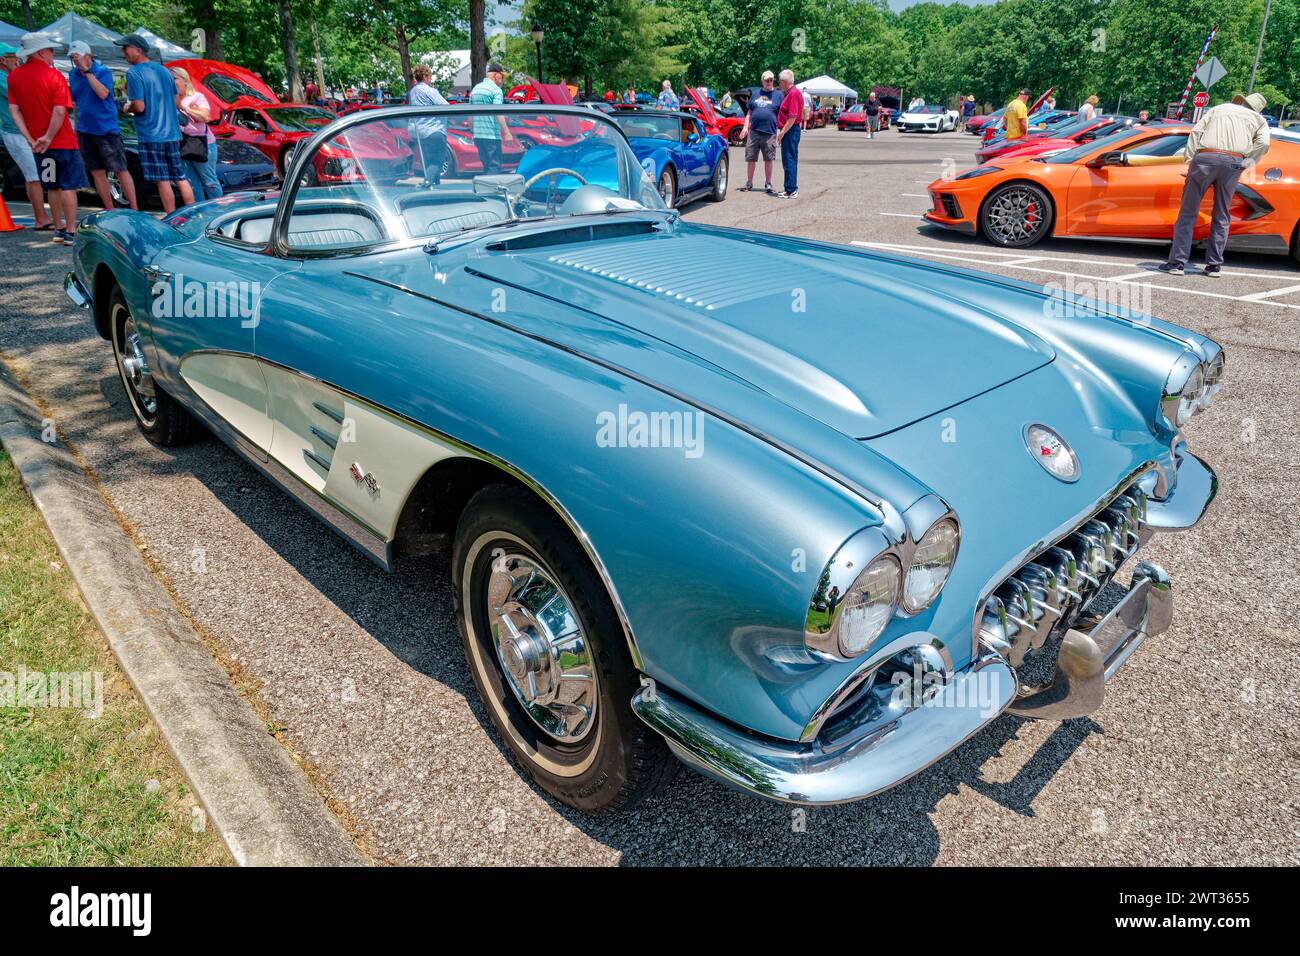 A late 1950s or early 1960 model convertible corvette a center piece of a corvette car show gathering outdoors on a sunny day in early summertime Stock Photo